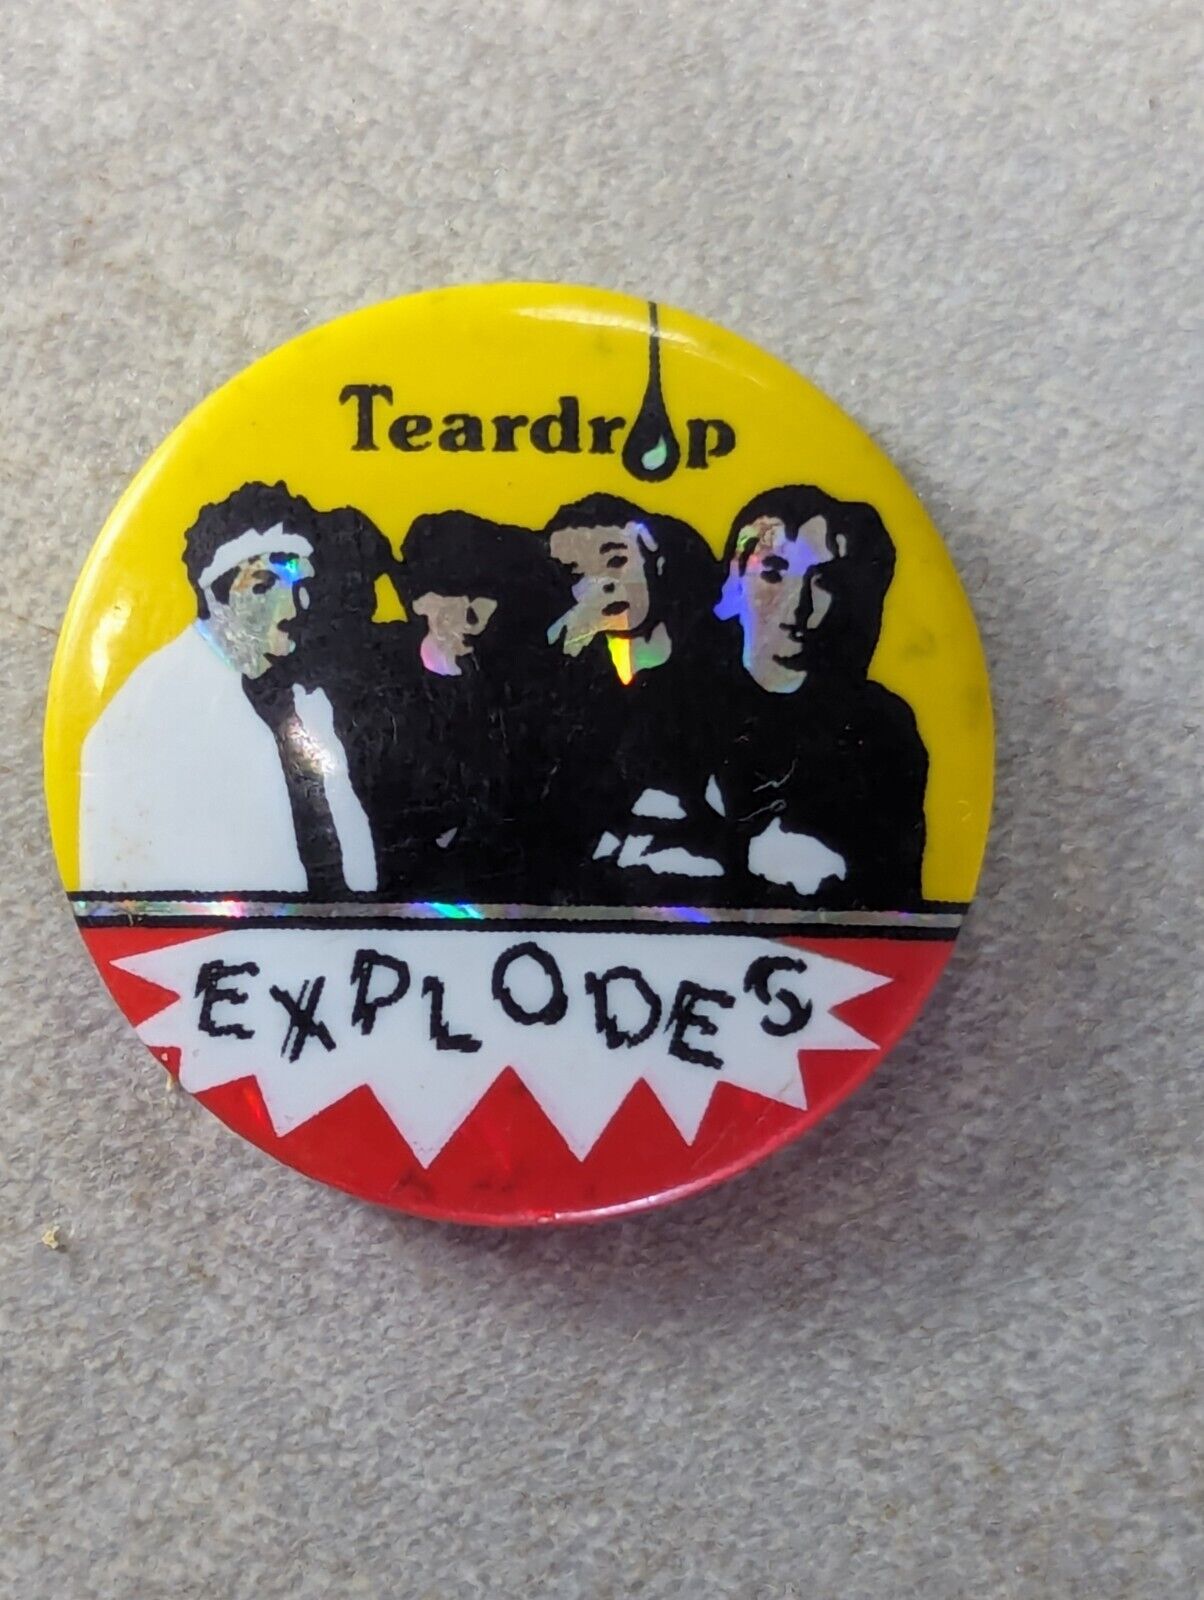 Vintage 80s Teardrop Explodes PIN BADGE Purchased Around 1986 